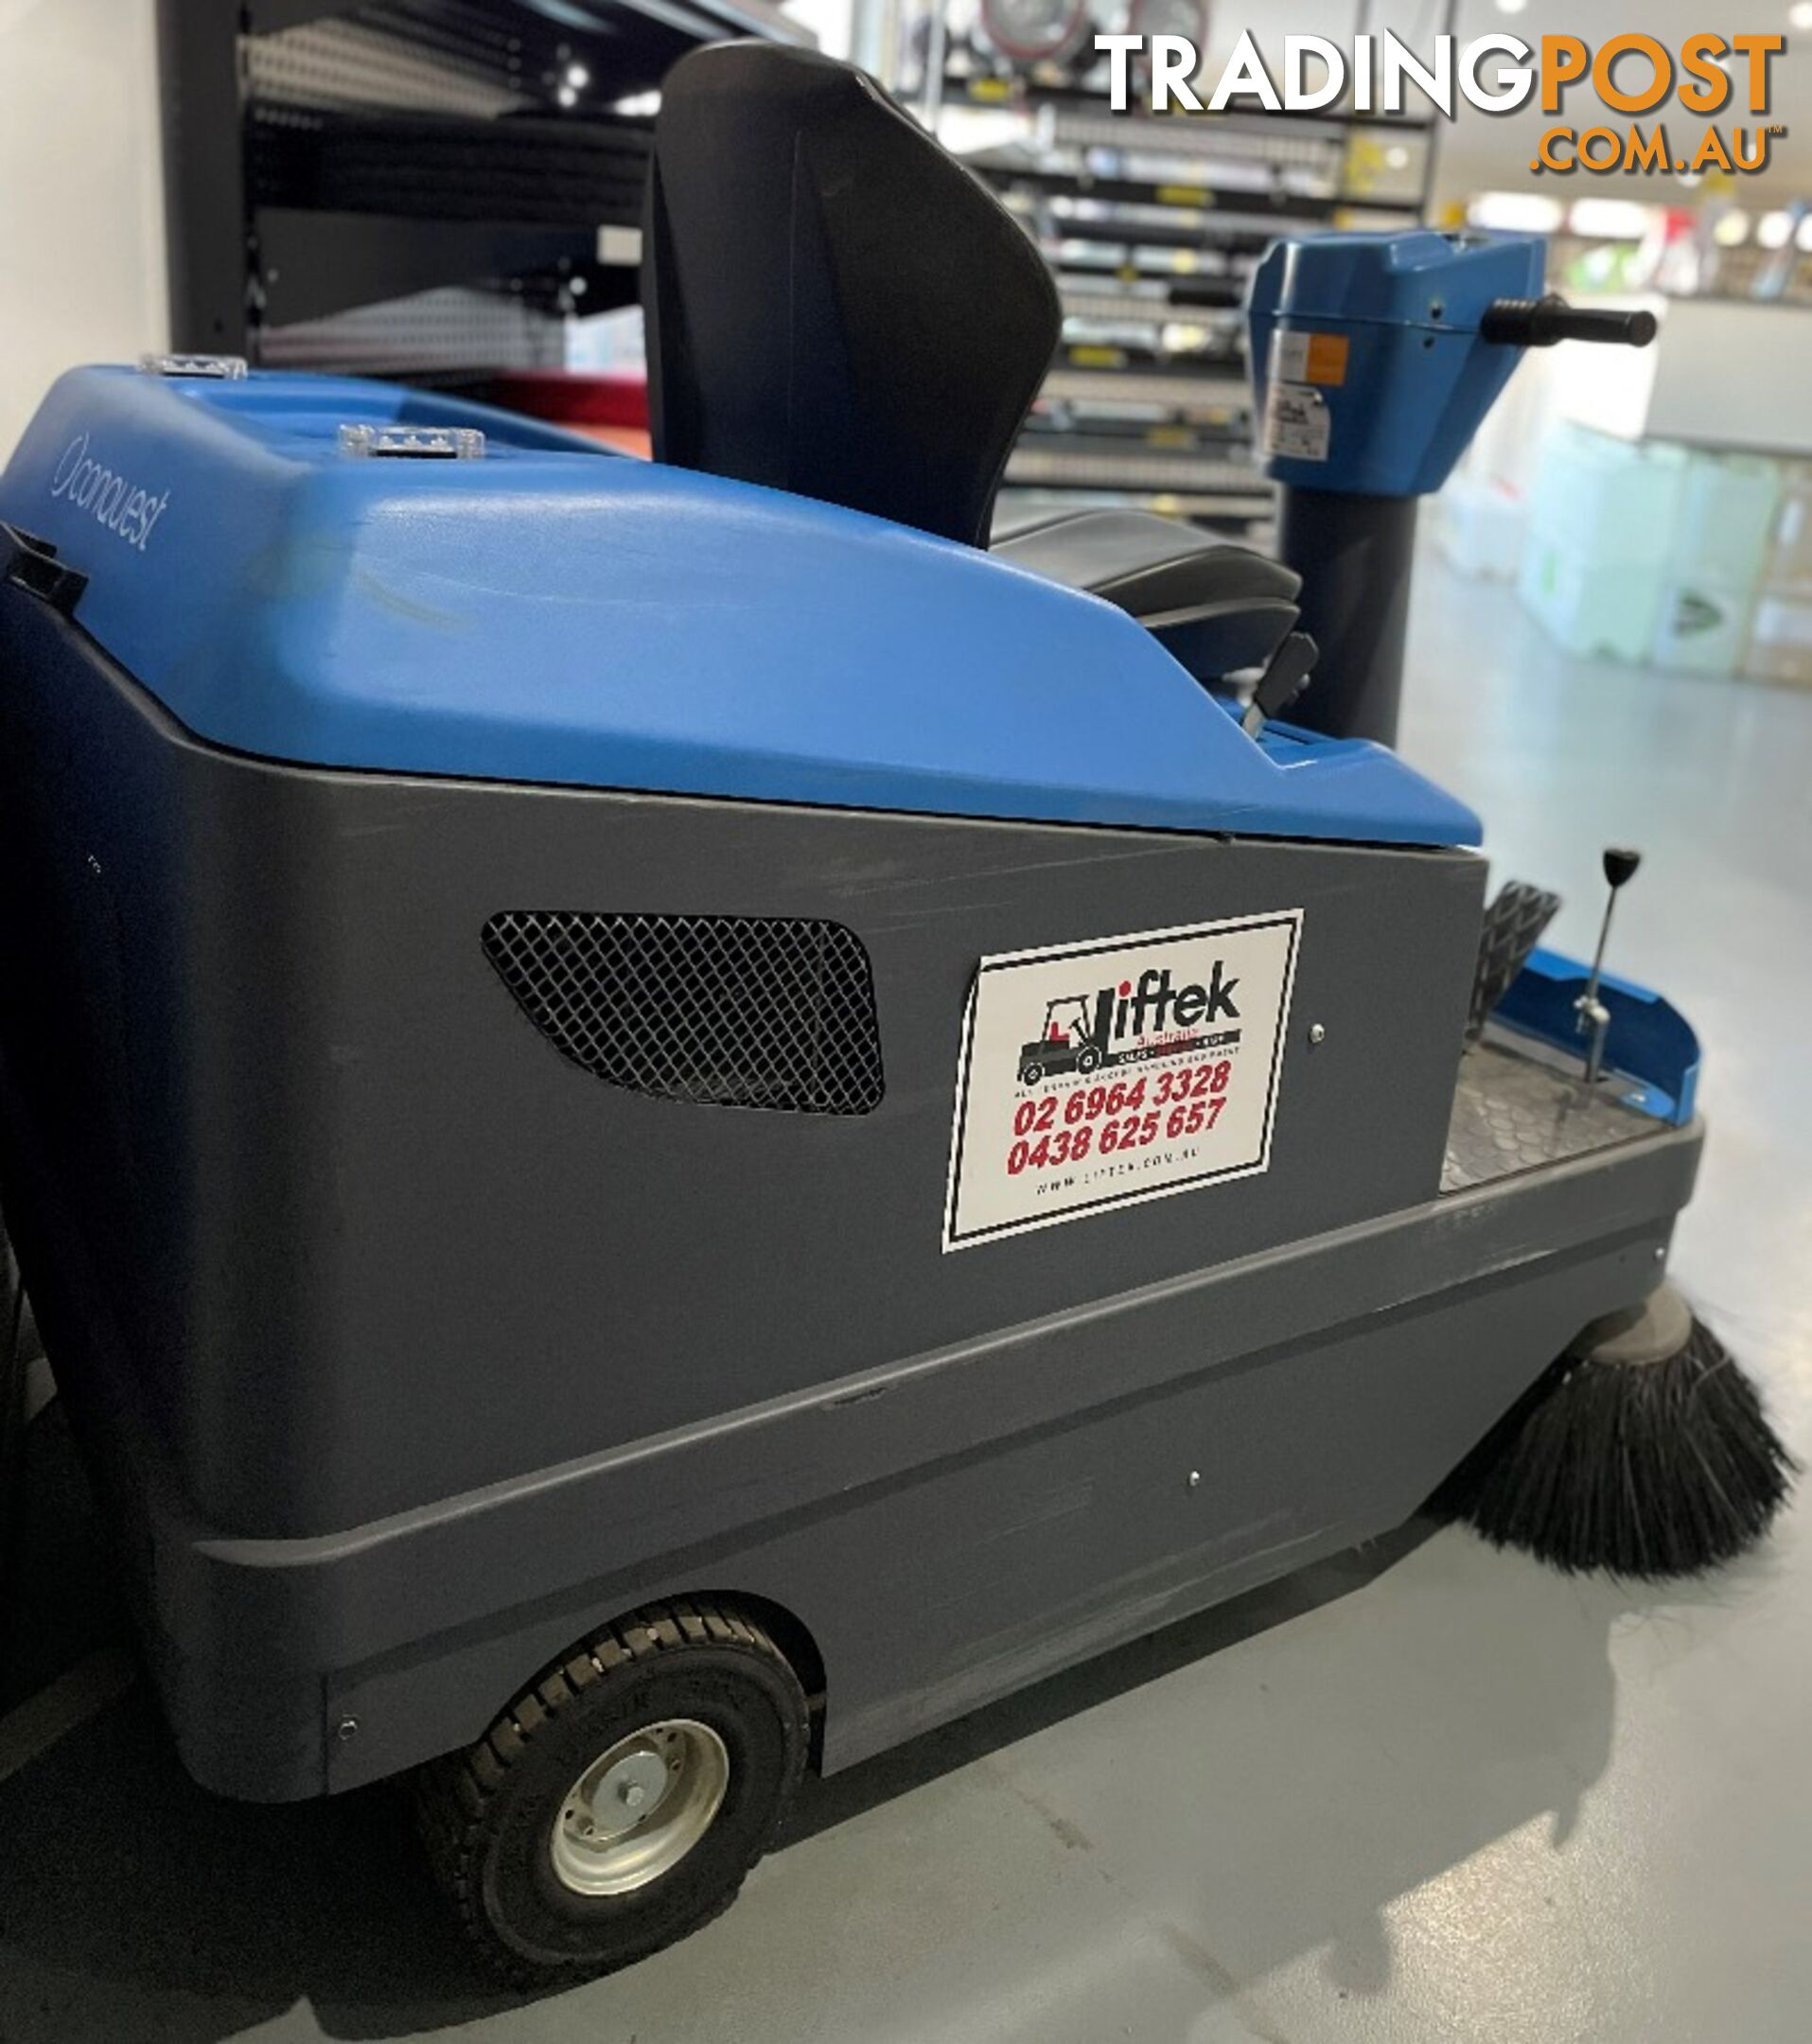 Used Conquest Ride On Floor Sweeper